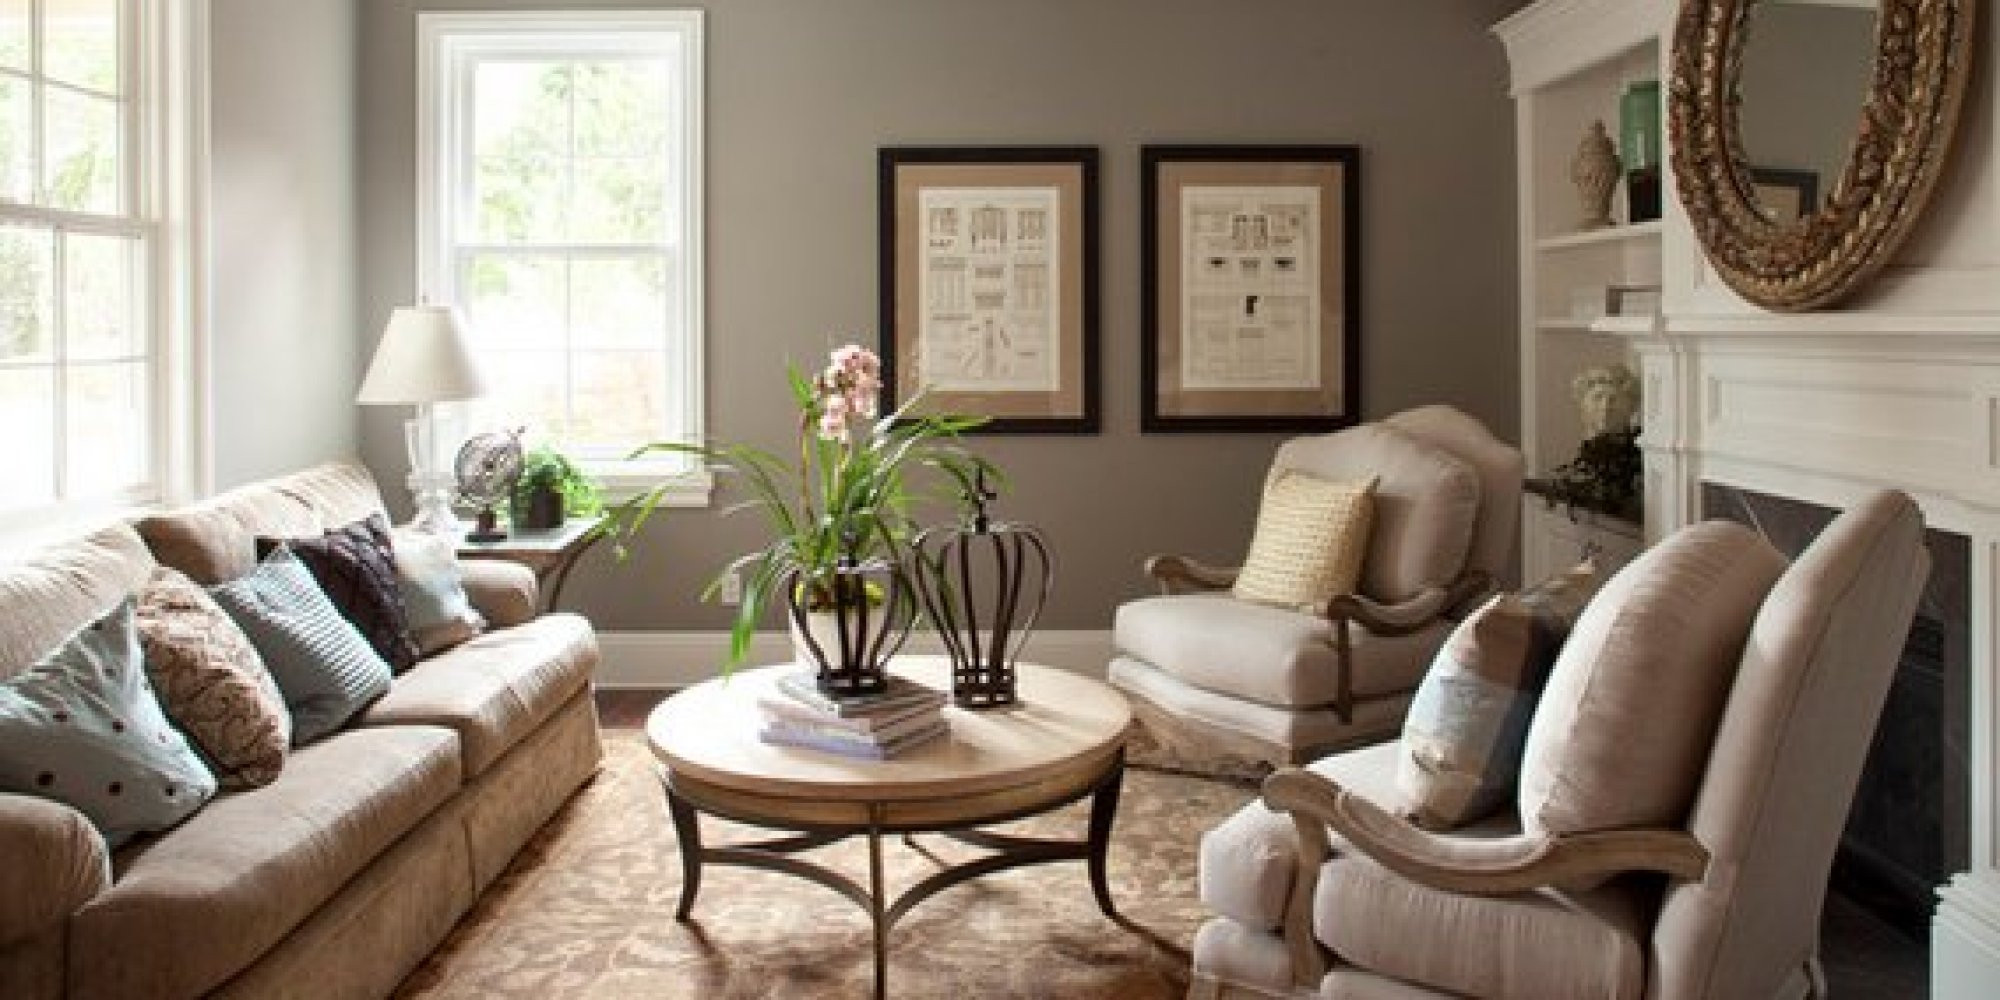 Best Living Room Paint Colors
 The 6 Best Paint Colors That Work In Any Home